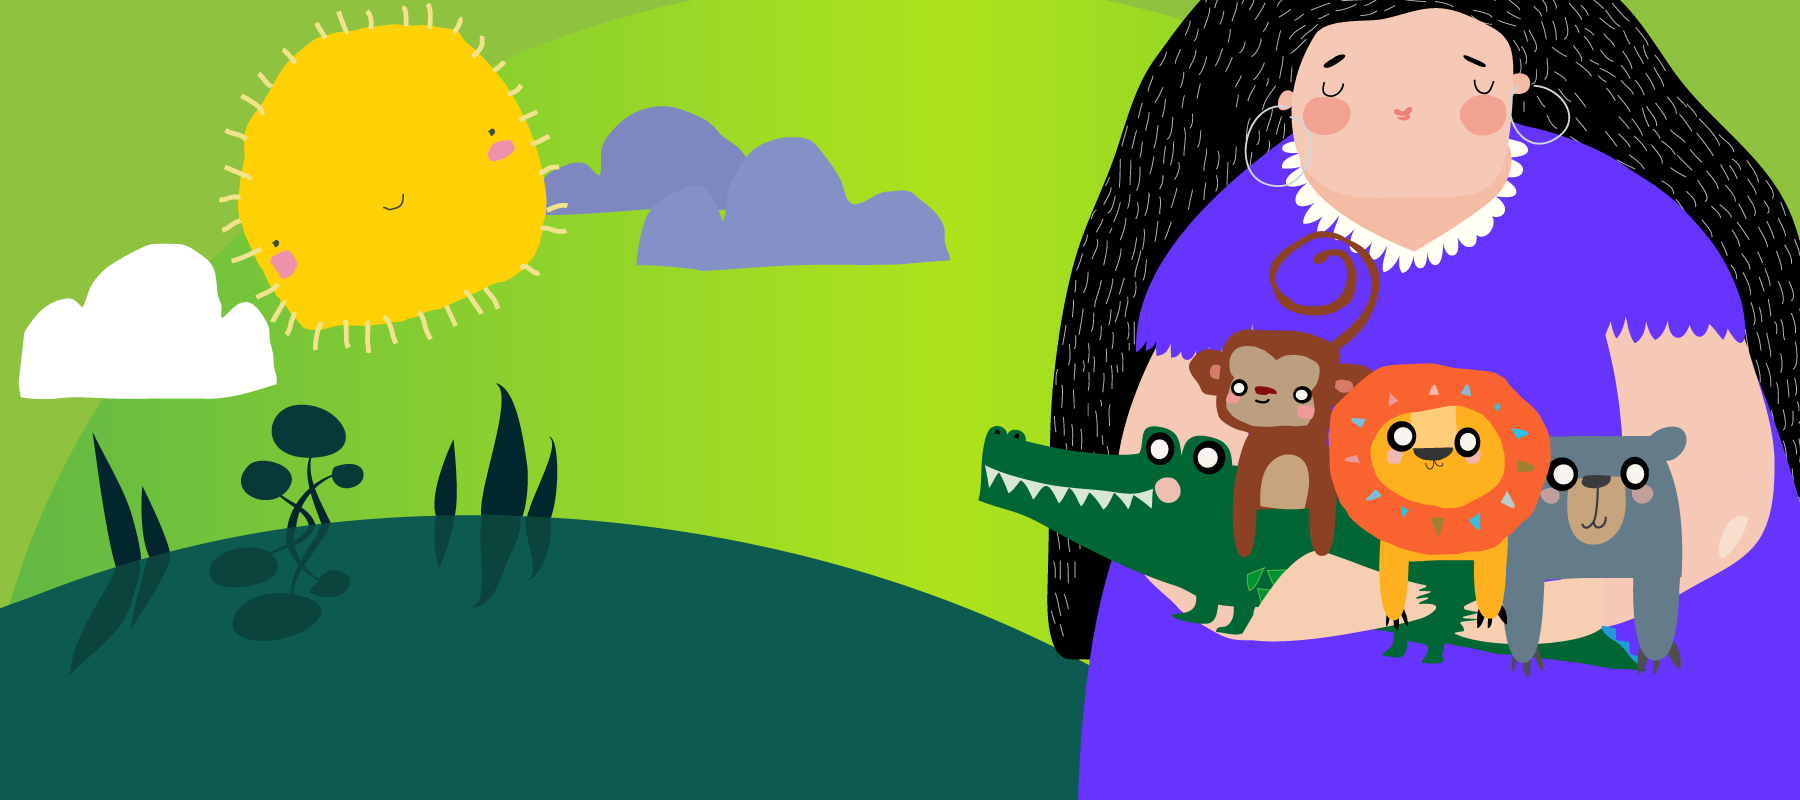 Illustration on a green background. A woman in a purple dress holds an armful of stuffed animals (crocodile, monkey, lion, bear) while the sun shines in the background.